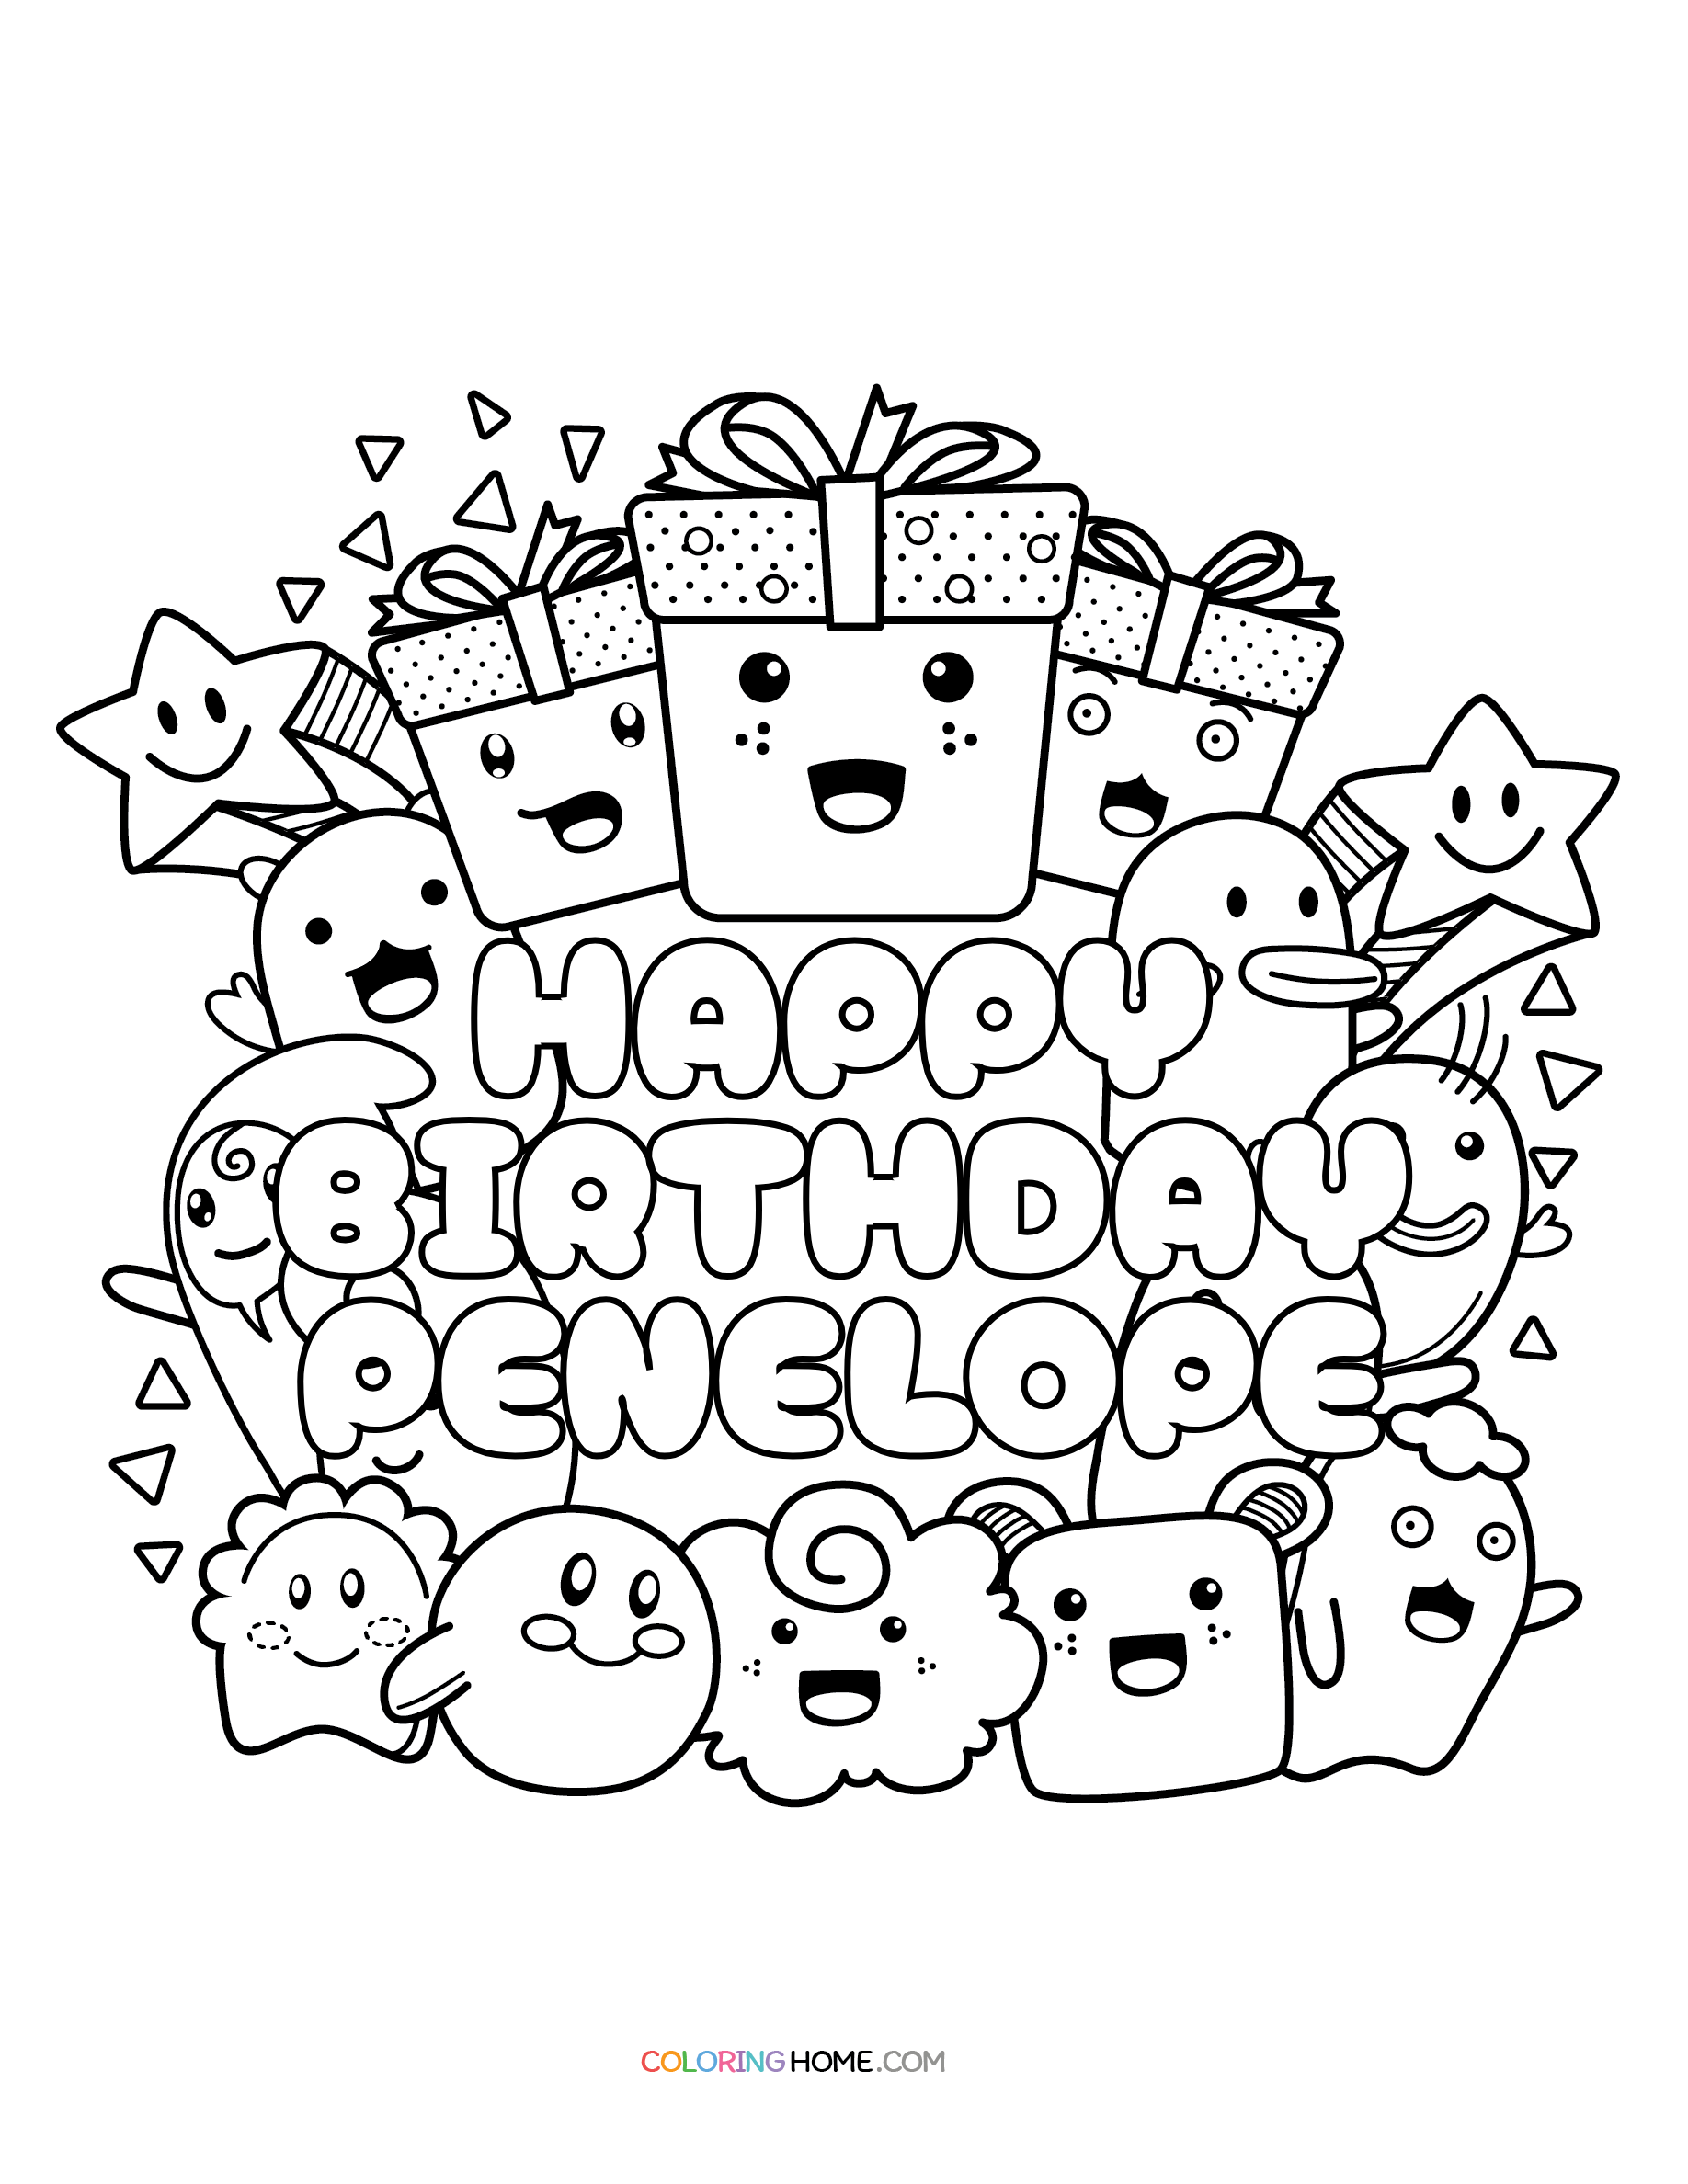 Happy Birthday Penelope coloring page